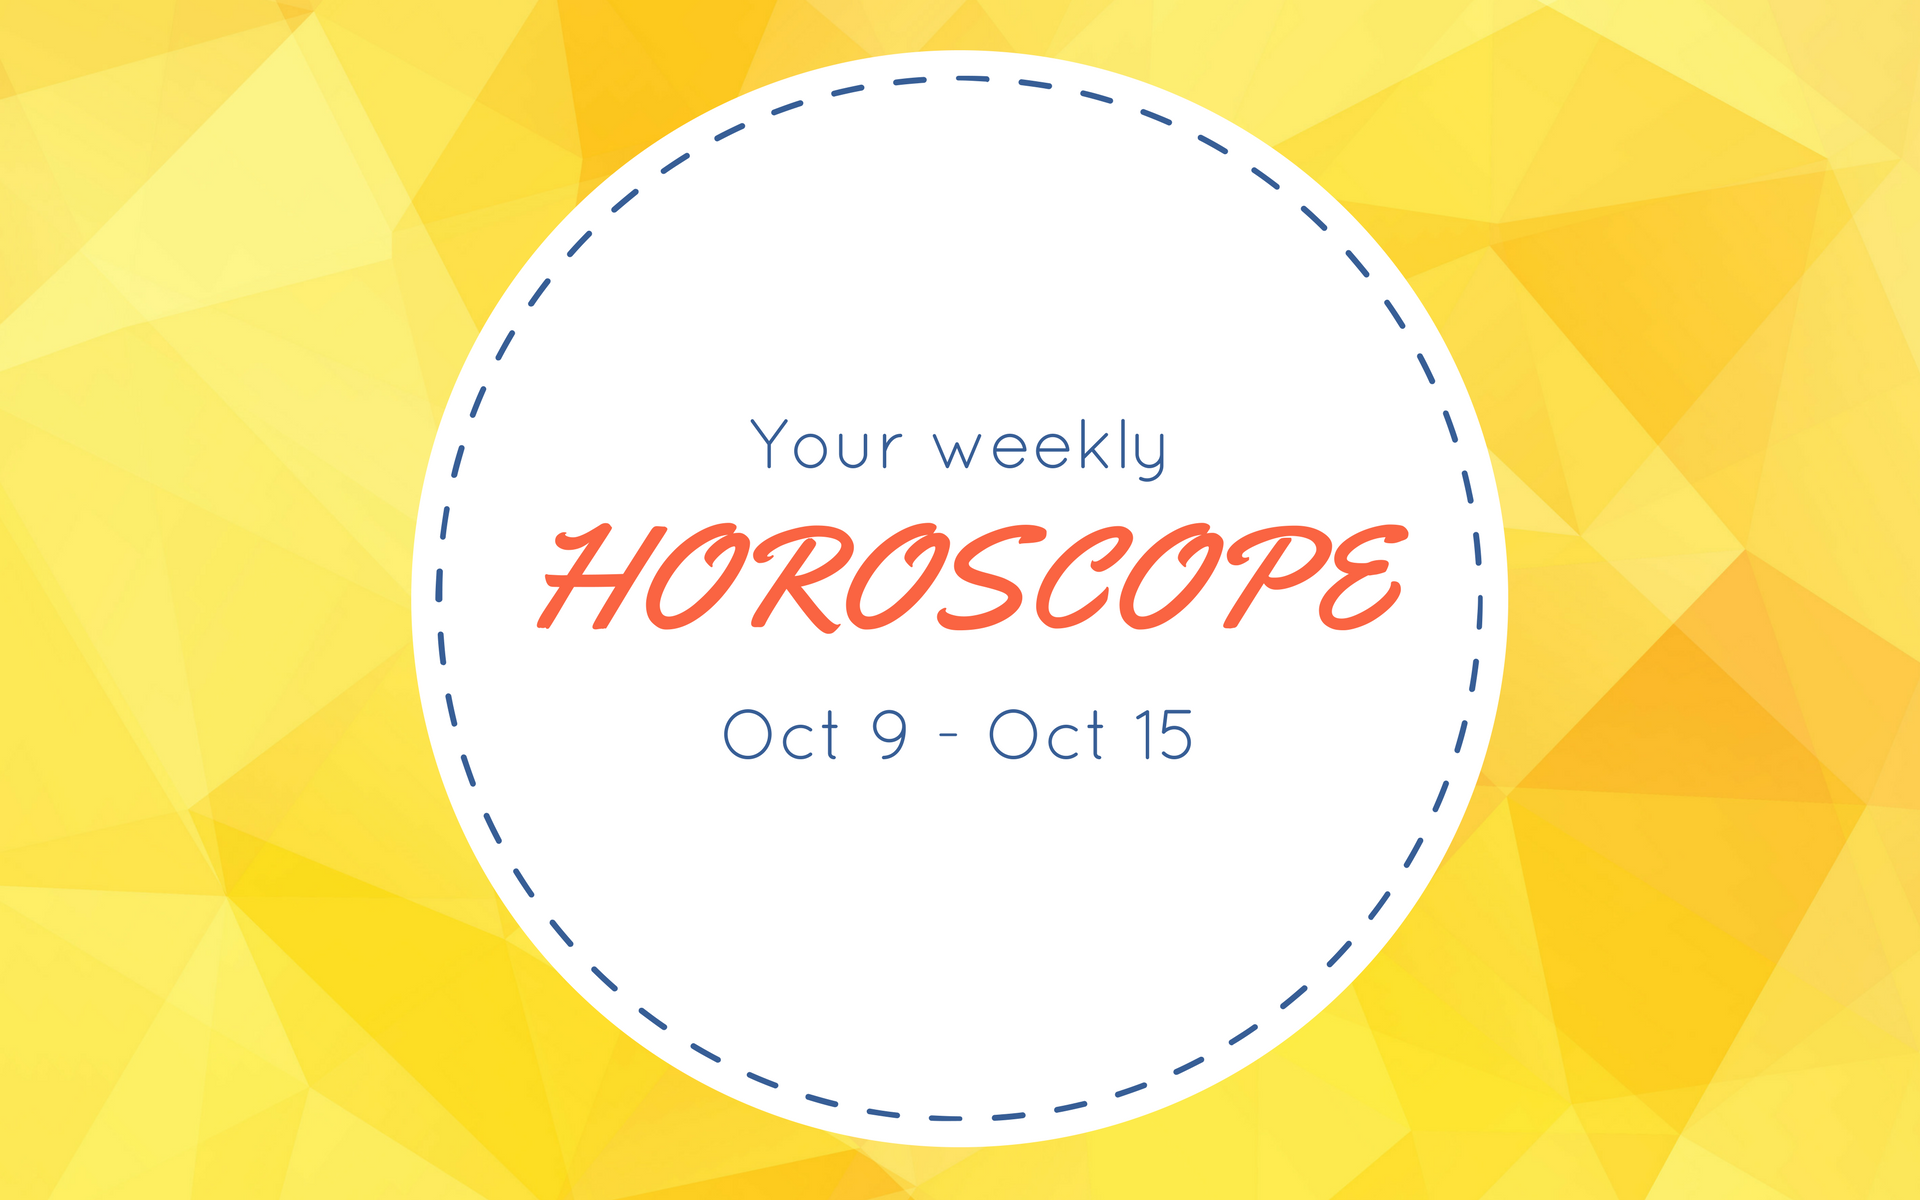 Your Weekly Horoscope: Oct 9 - Oct 15